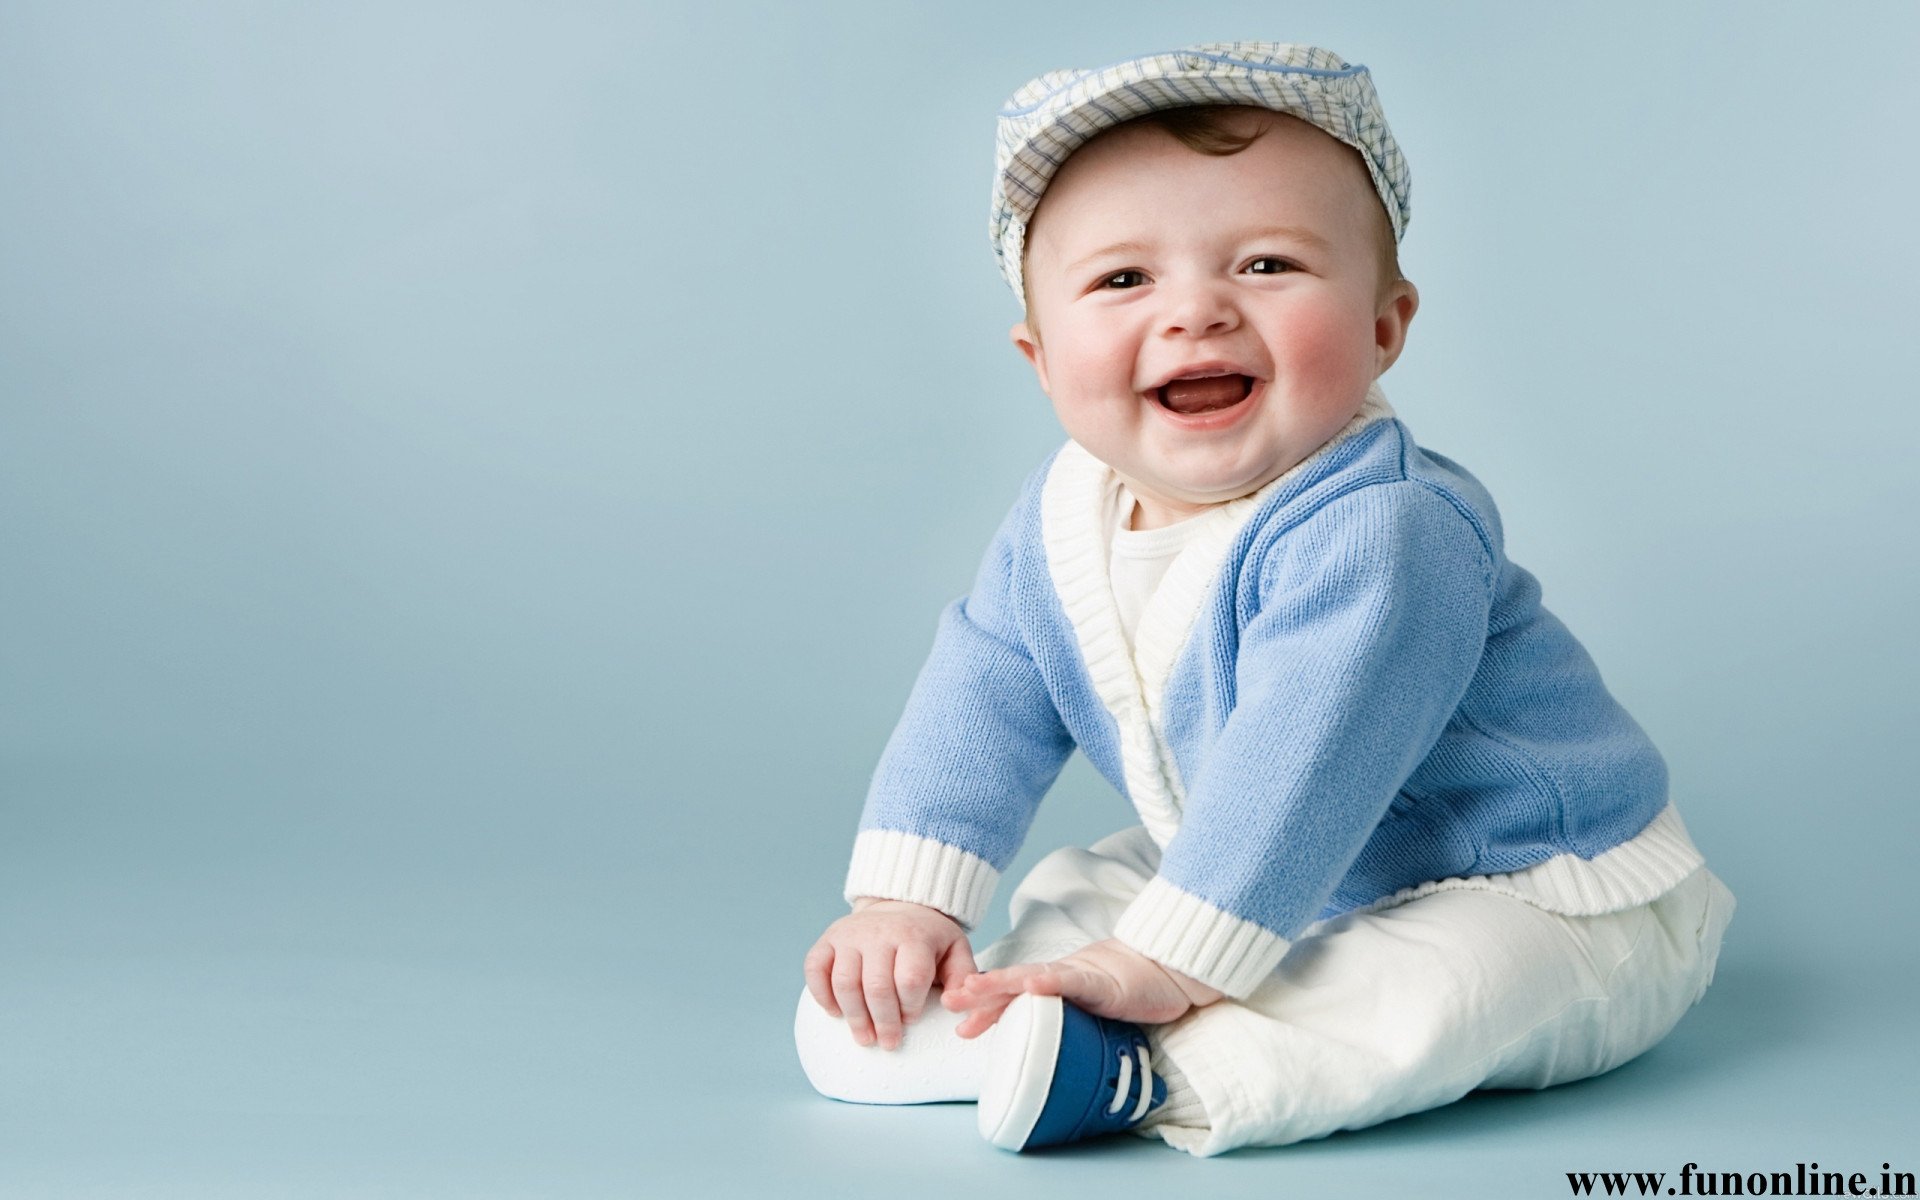  Baby Wallpapers Download Pretty and Smiling Babies HD Wallpaper 1920x1200